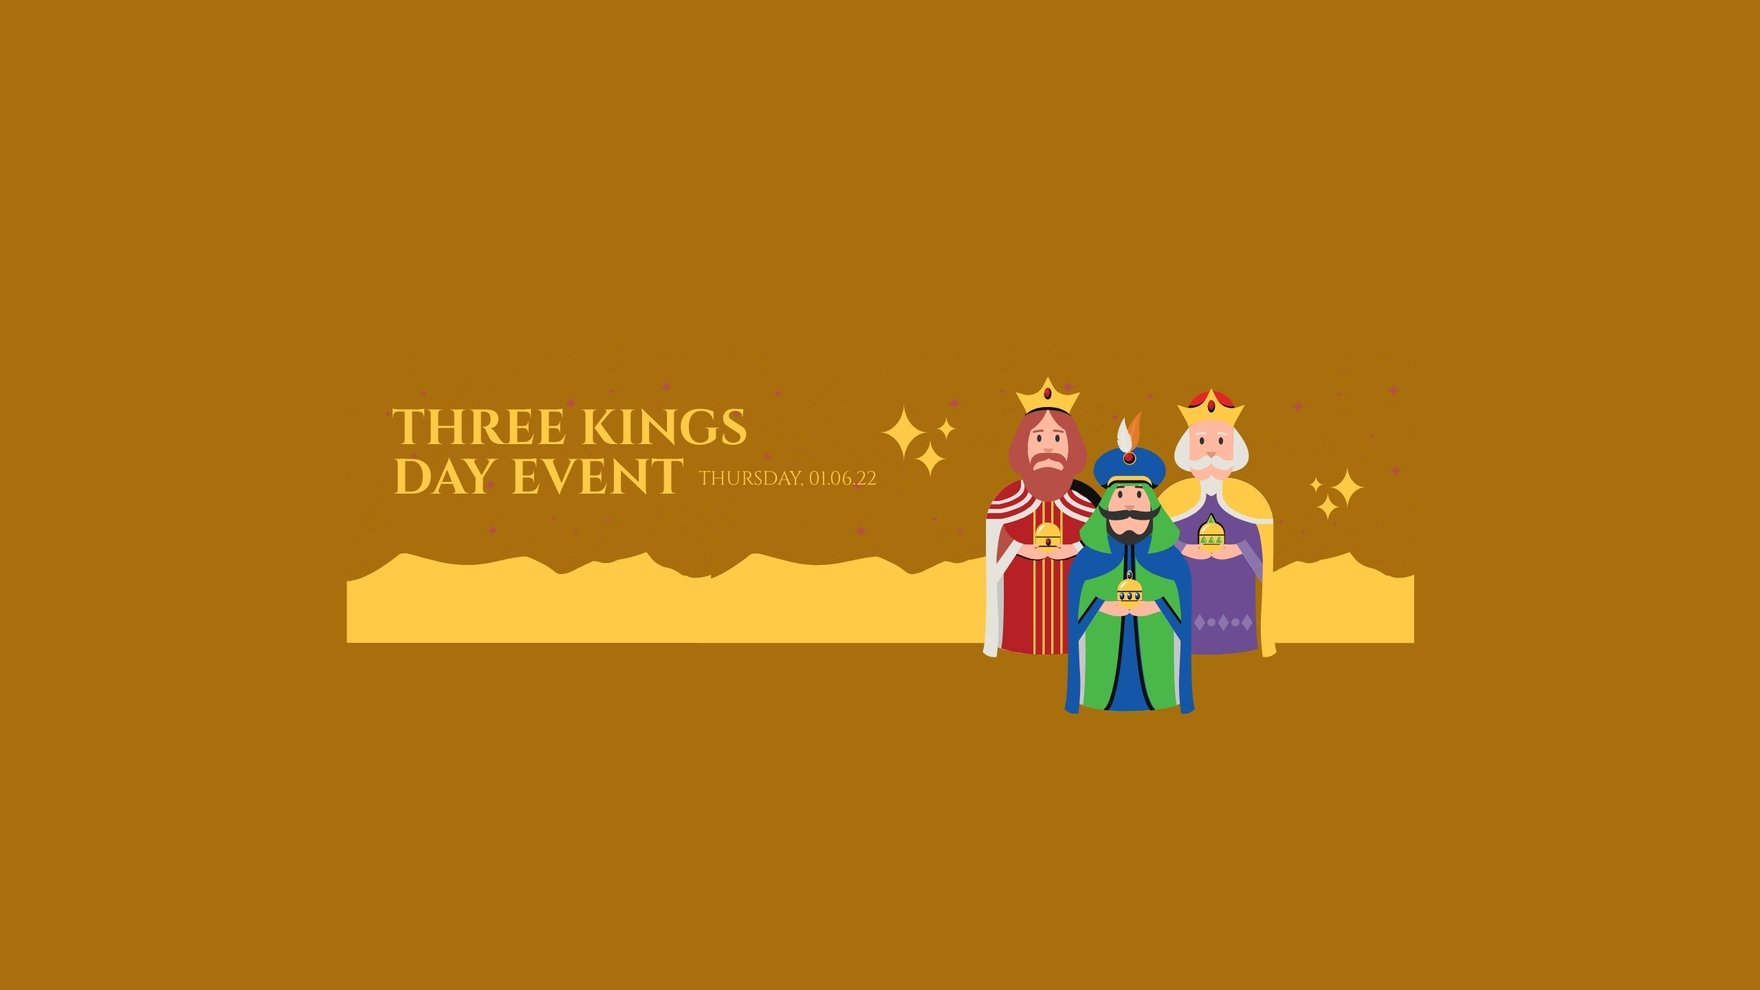 Free Three Kings Day Event Youtube Banner Template